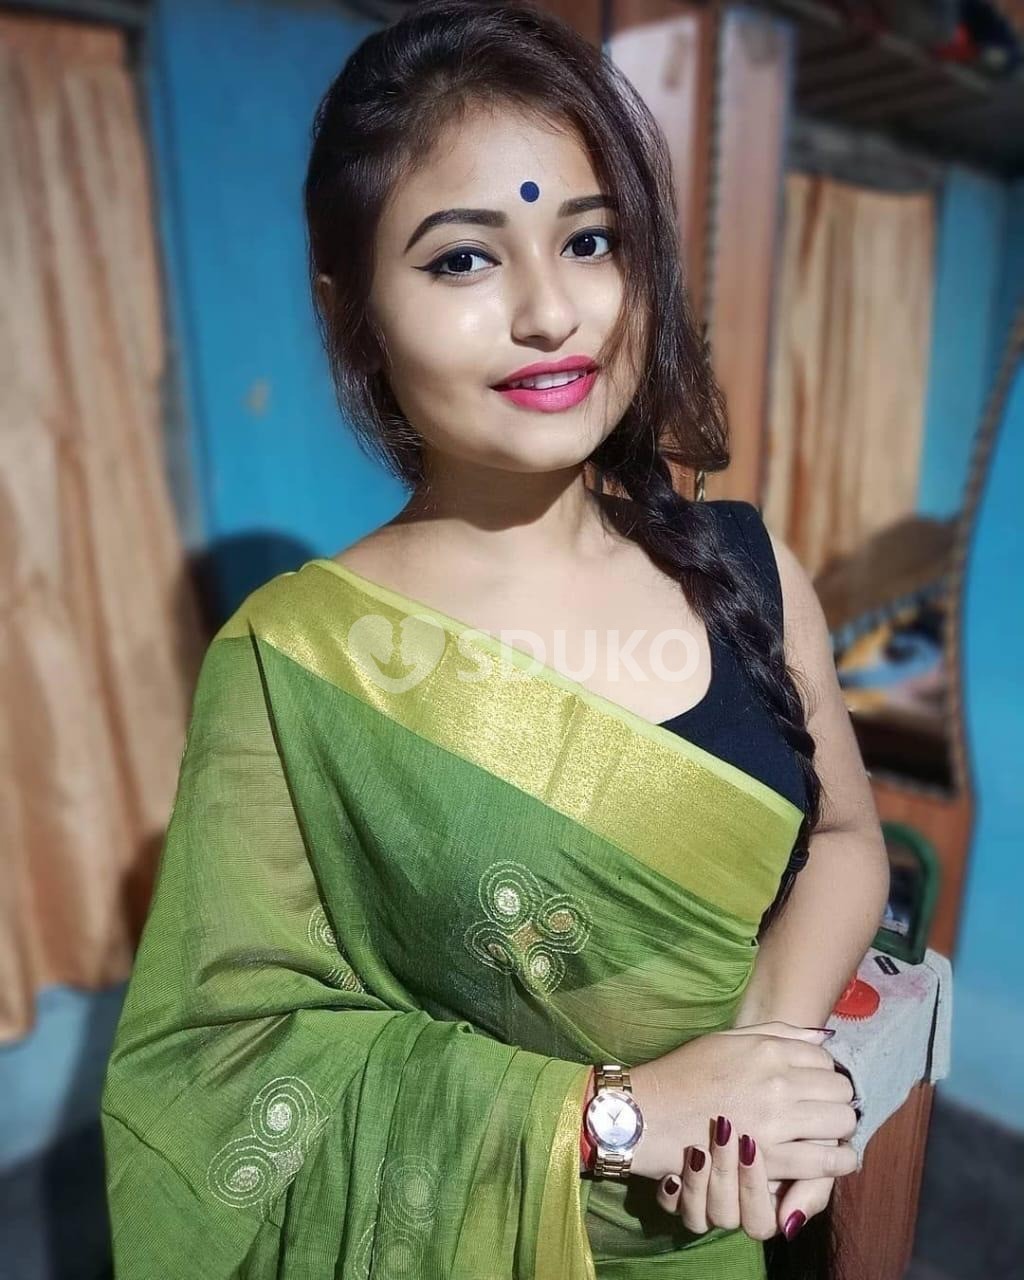 Durgapur 100% safe and secure today low price unlimited enjoy hot college girls available